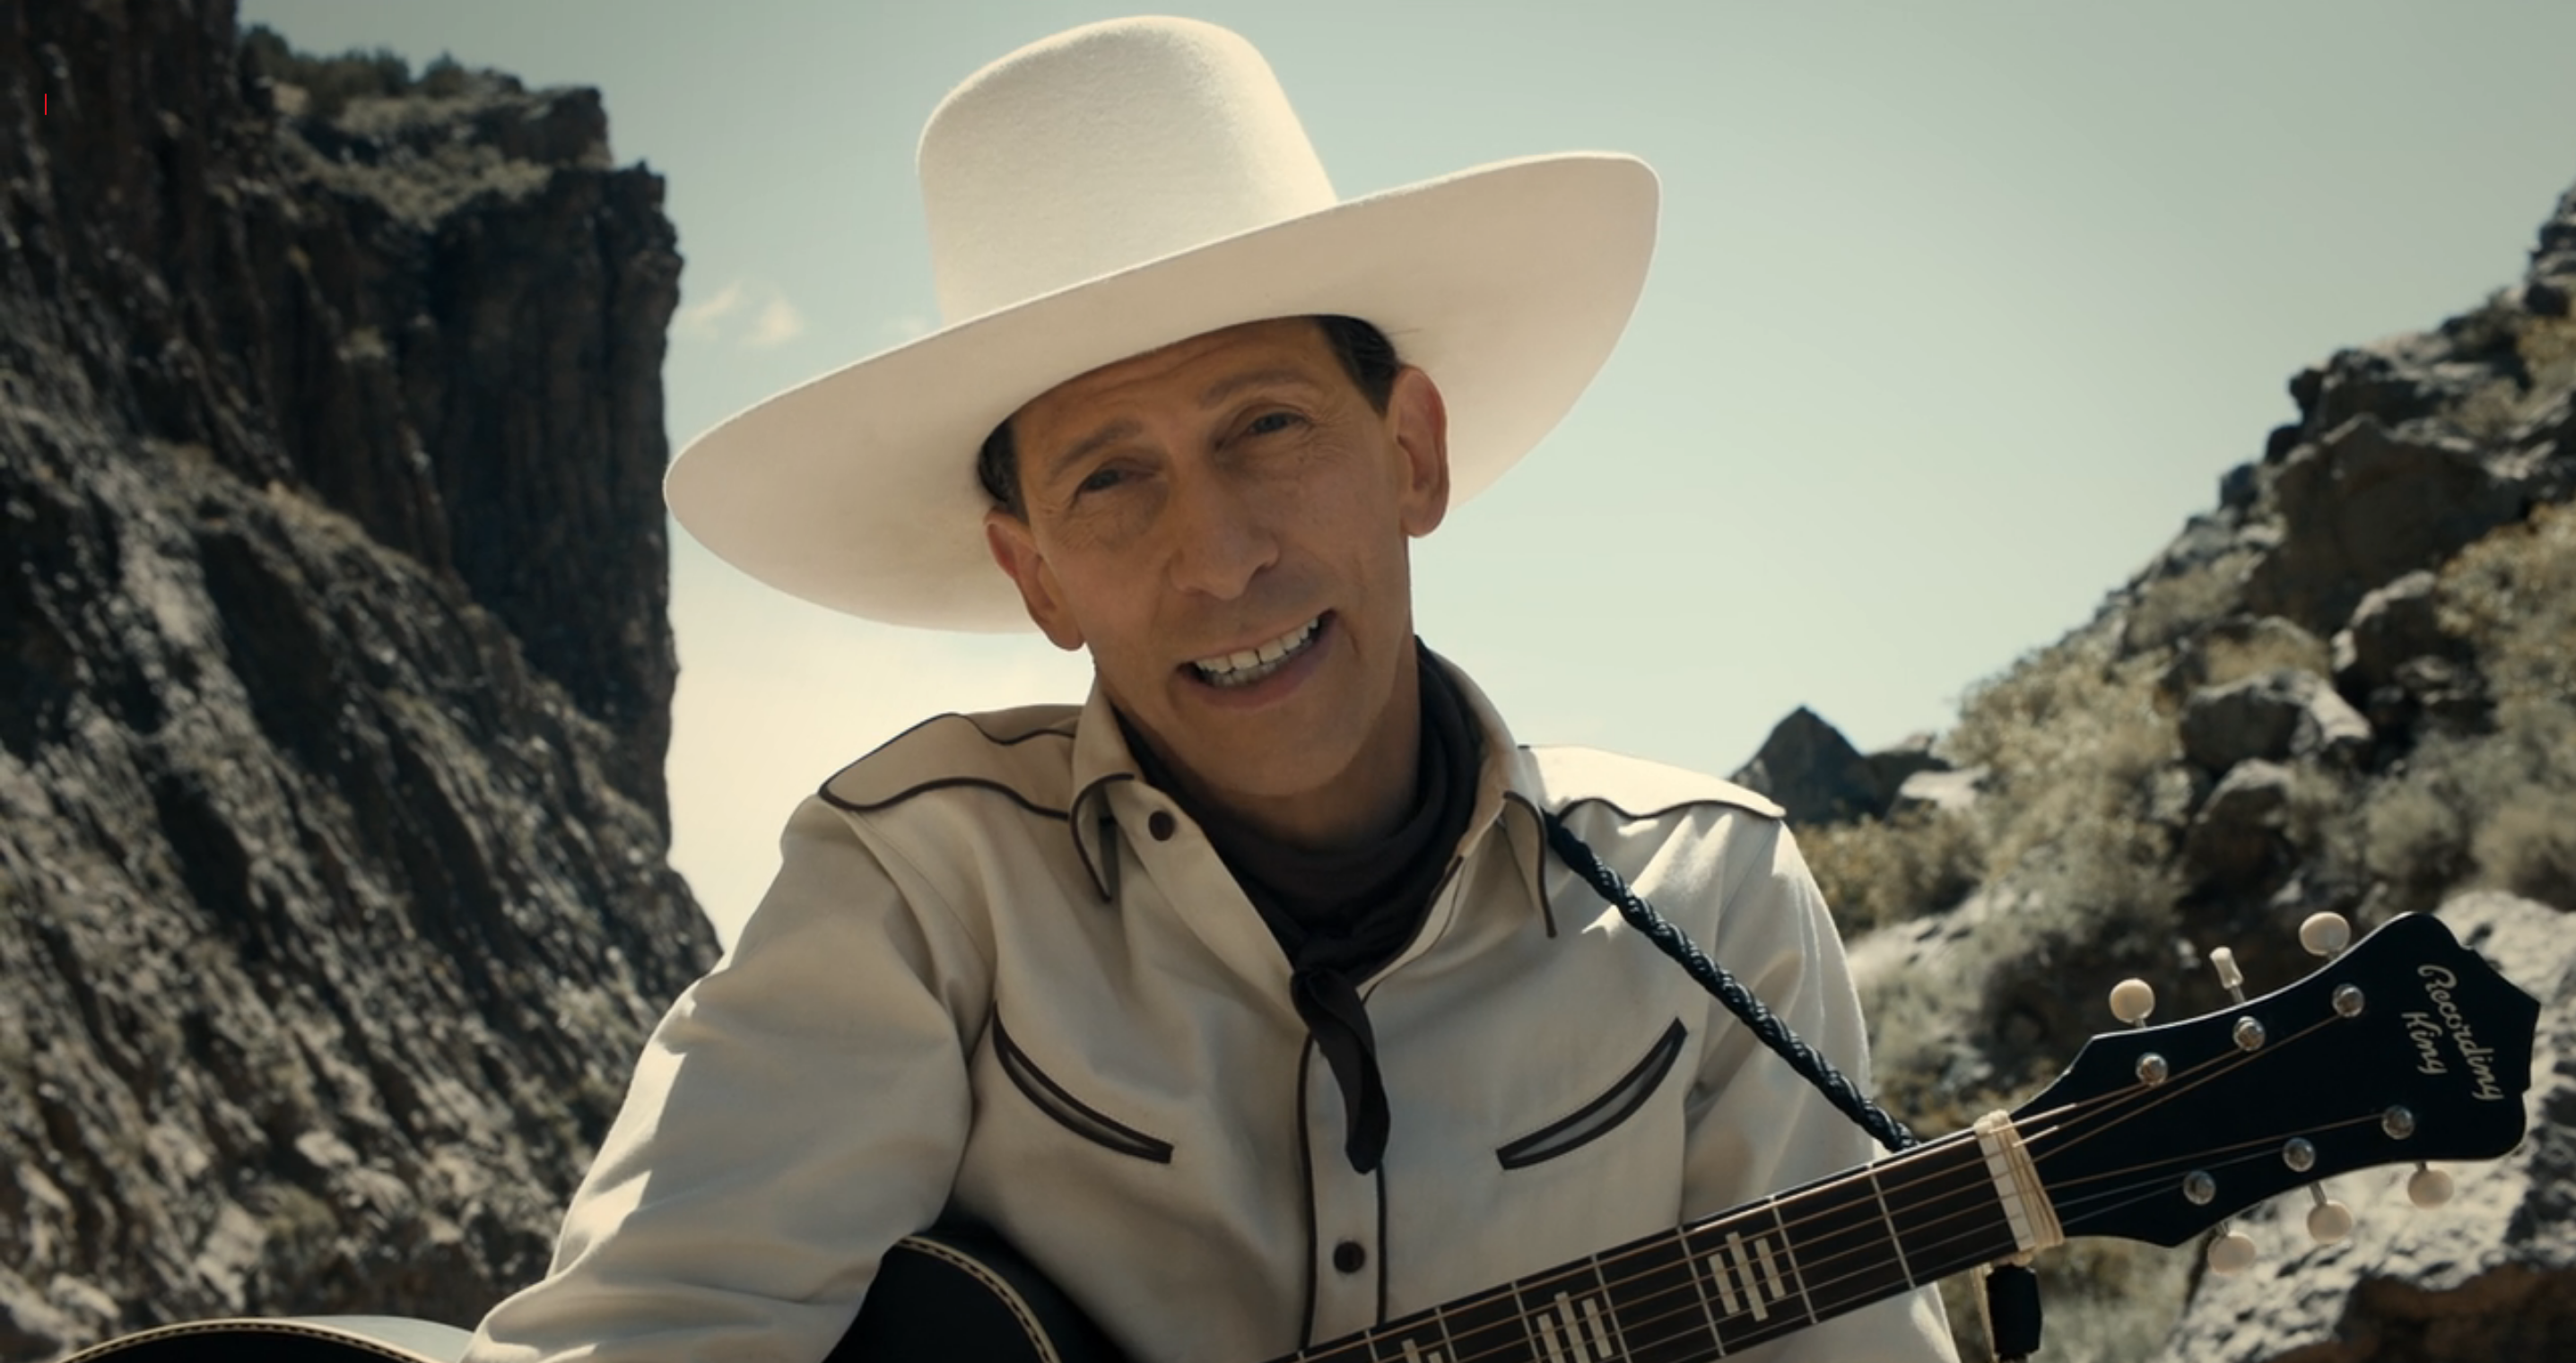 Reviews: The Ballad of Buster Scruggs (2018)